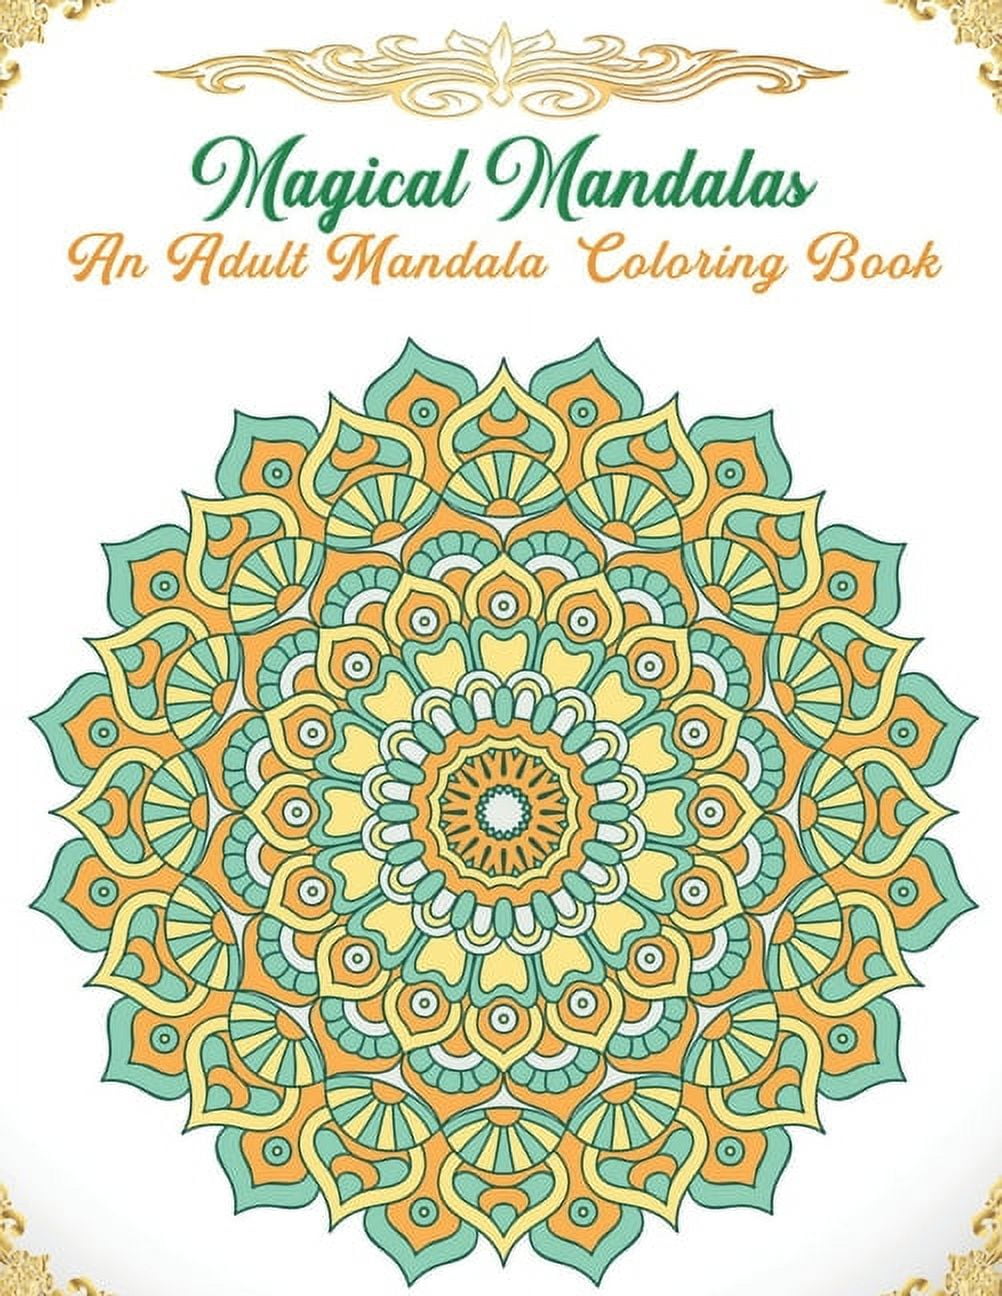 Adult Coloring Book: Mandalas Coloring for Meditation, Relaxation and  Stress Relieving 50 mandalas to color, 8 x 10 inches (Paperback)